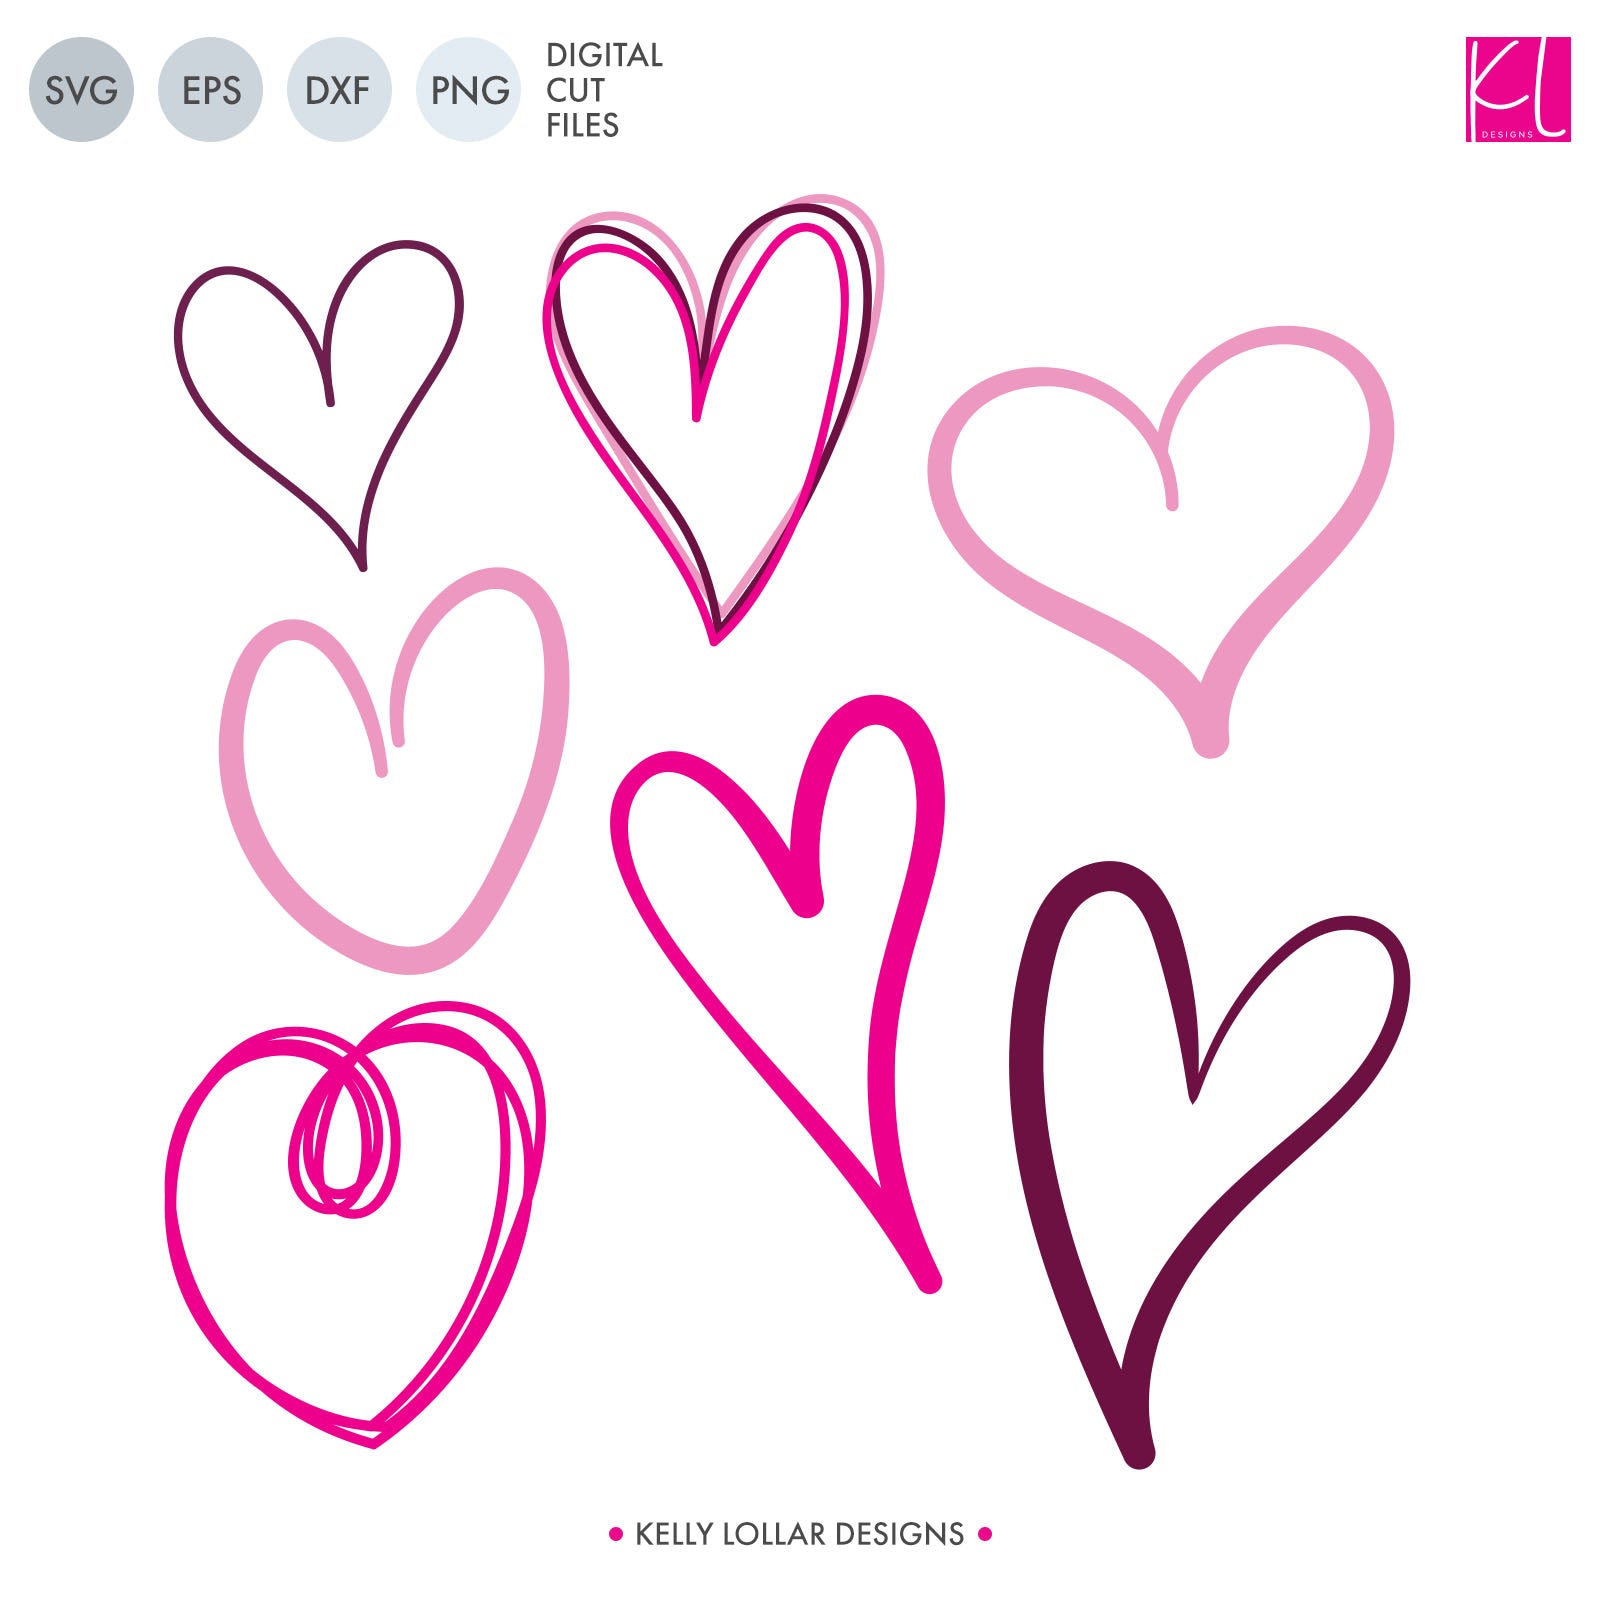 Download Free Doodle Hearts Svg Cut Files Kelly Lollar Designs